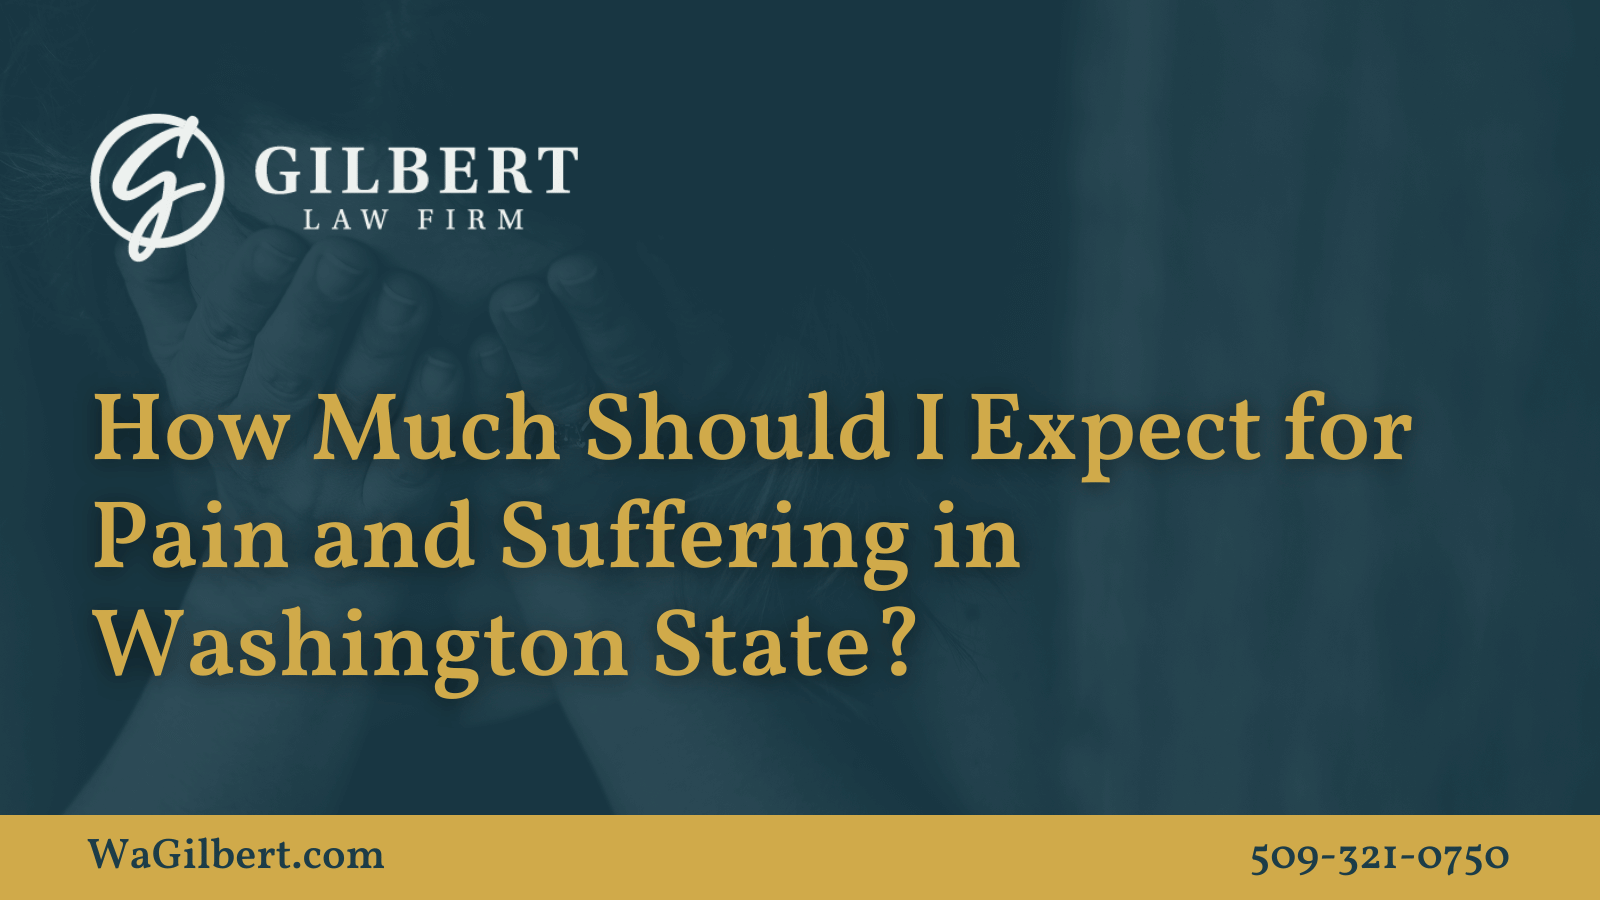 How Much Should I Expect for Pain and Suffering in Washington State? - Gilbert Law Firm Spokane Washington